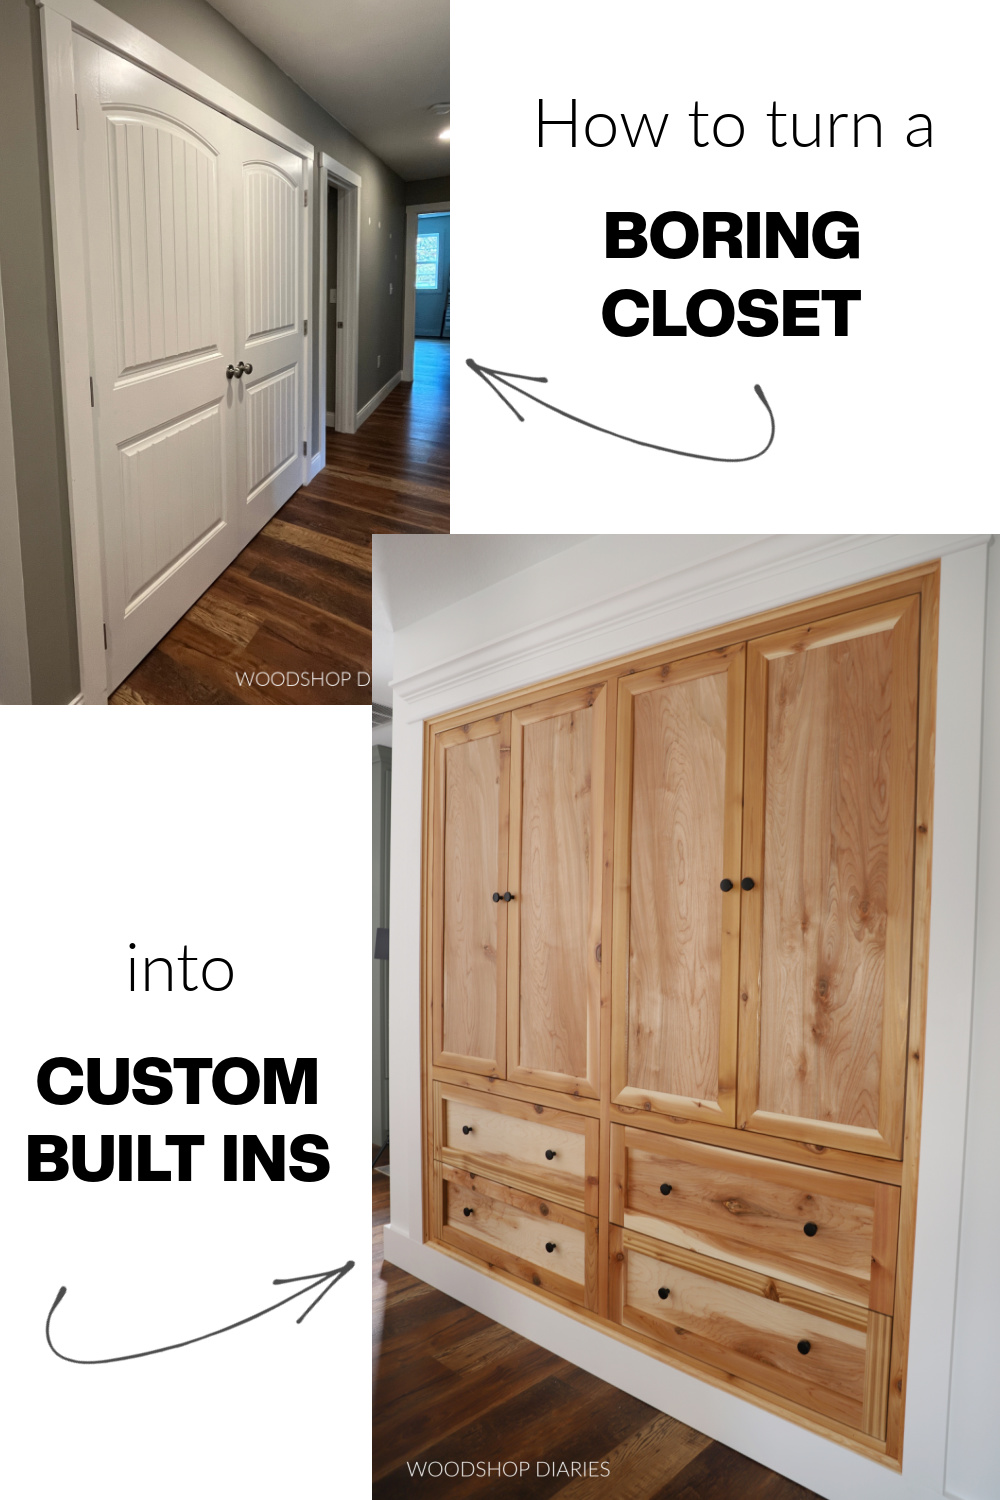 Hallway closet to built ins pin image collage showing before closet doors at top left and completed built in cabinets at bottom right with text "how to turn a boring closet into custom built ins"